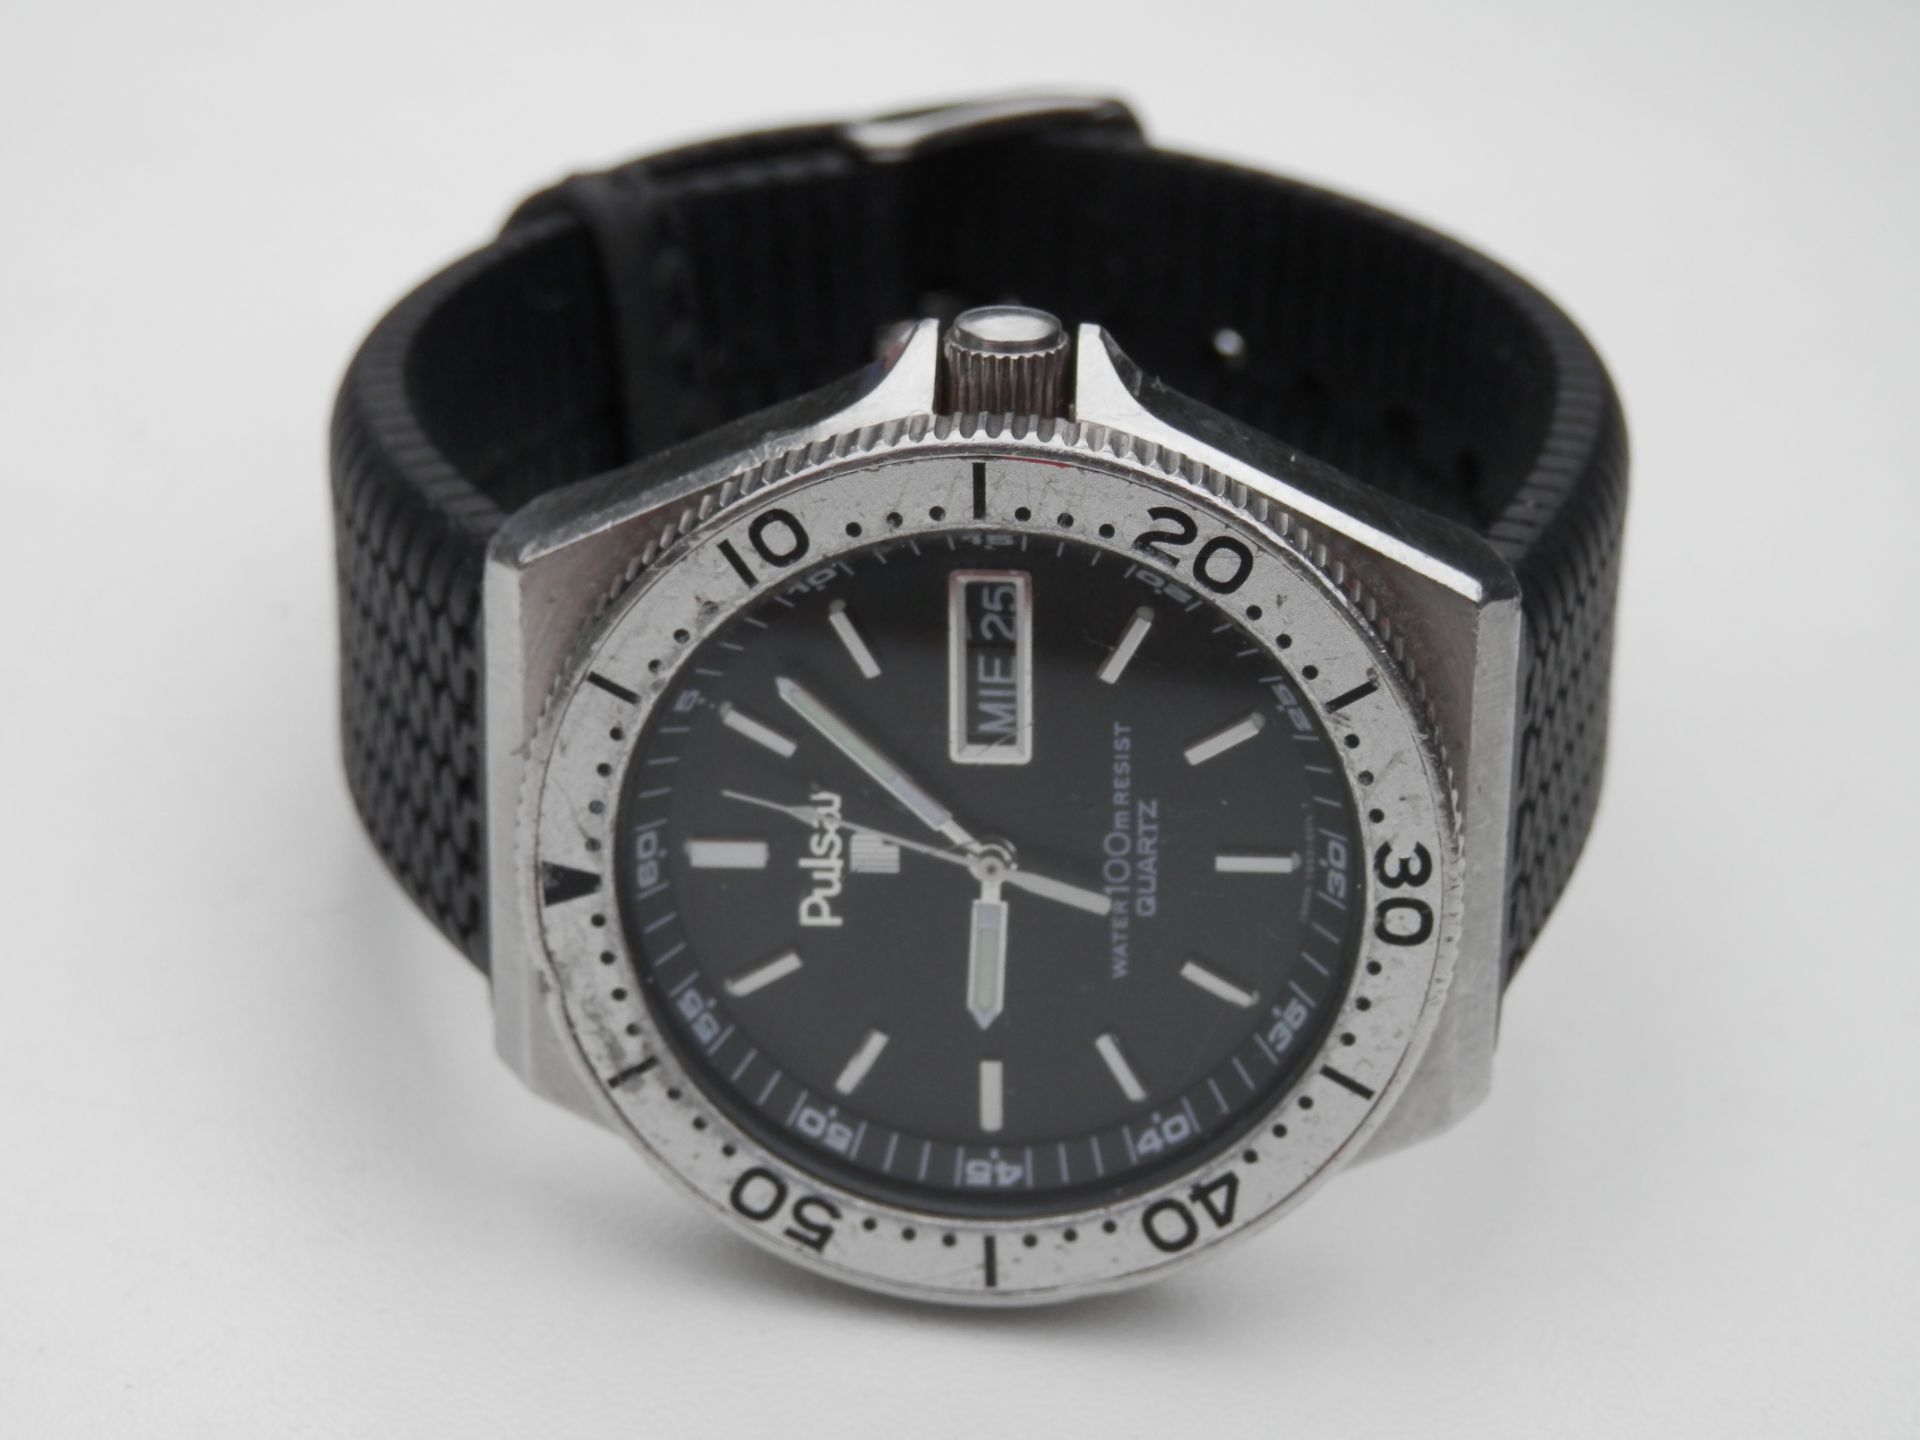 RARE GENTS 1980S PULSAR Y563 DIVERS STYLE 100M WATER RESISTANT QUARTZ DAY/DATE WATCH, WORKING. - Image 4 of 7